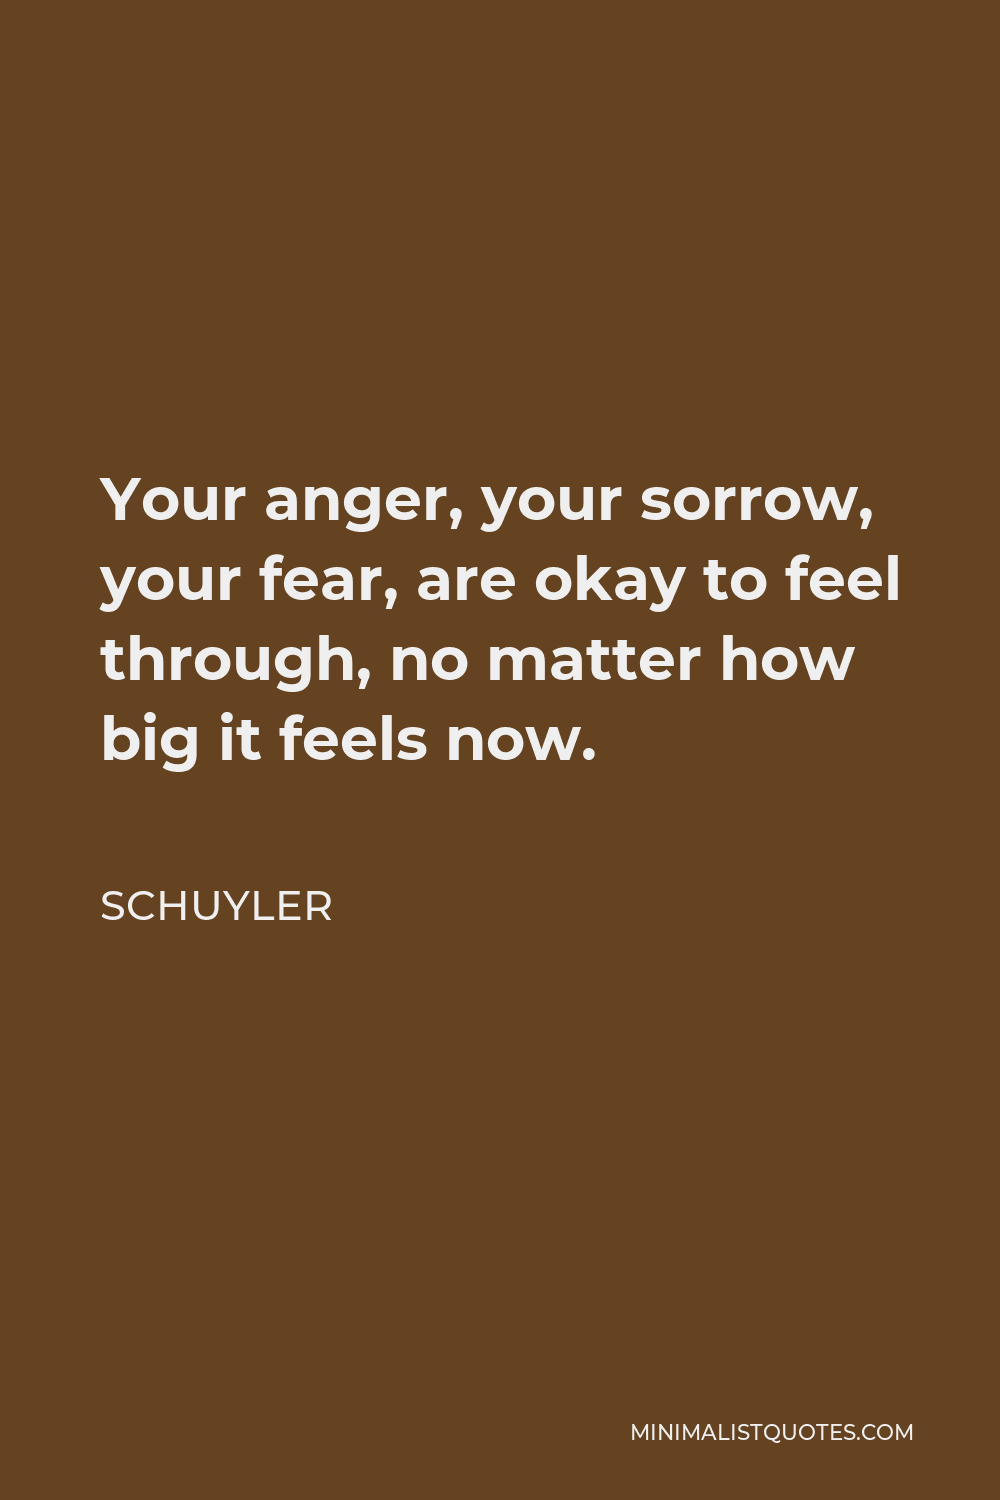 Schuyler Quote - Your anger, your sorrow, your fear, are okay to feel through, no matter how big it feels now.